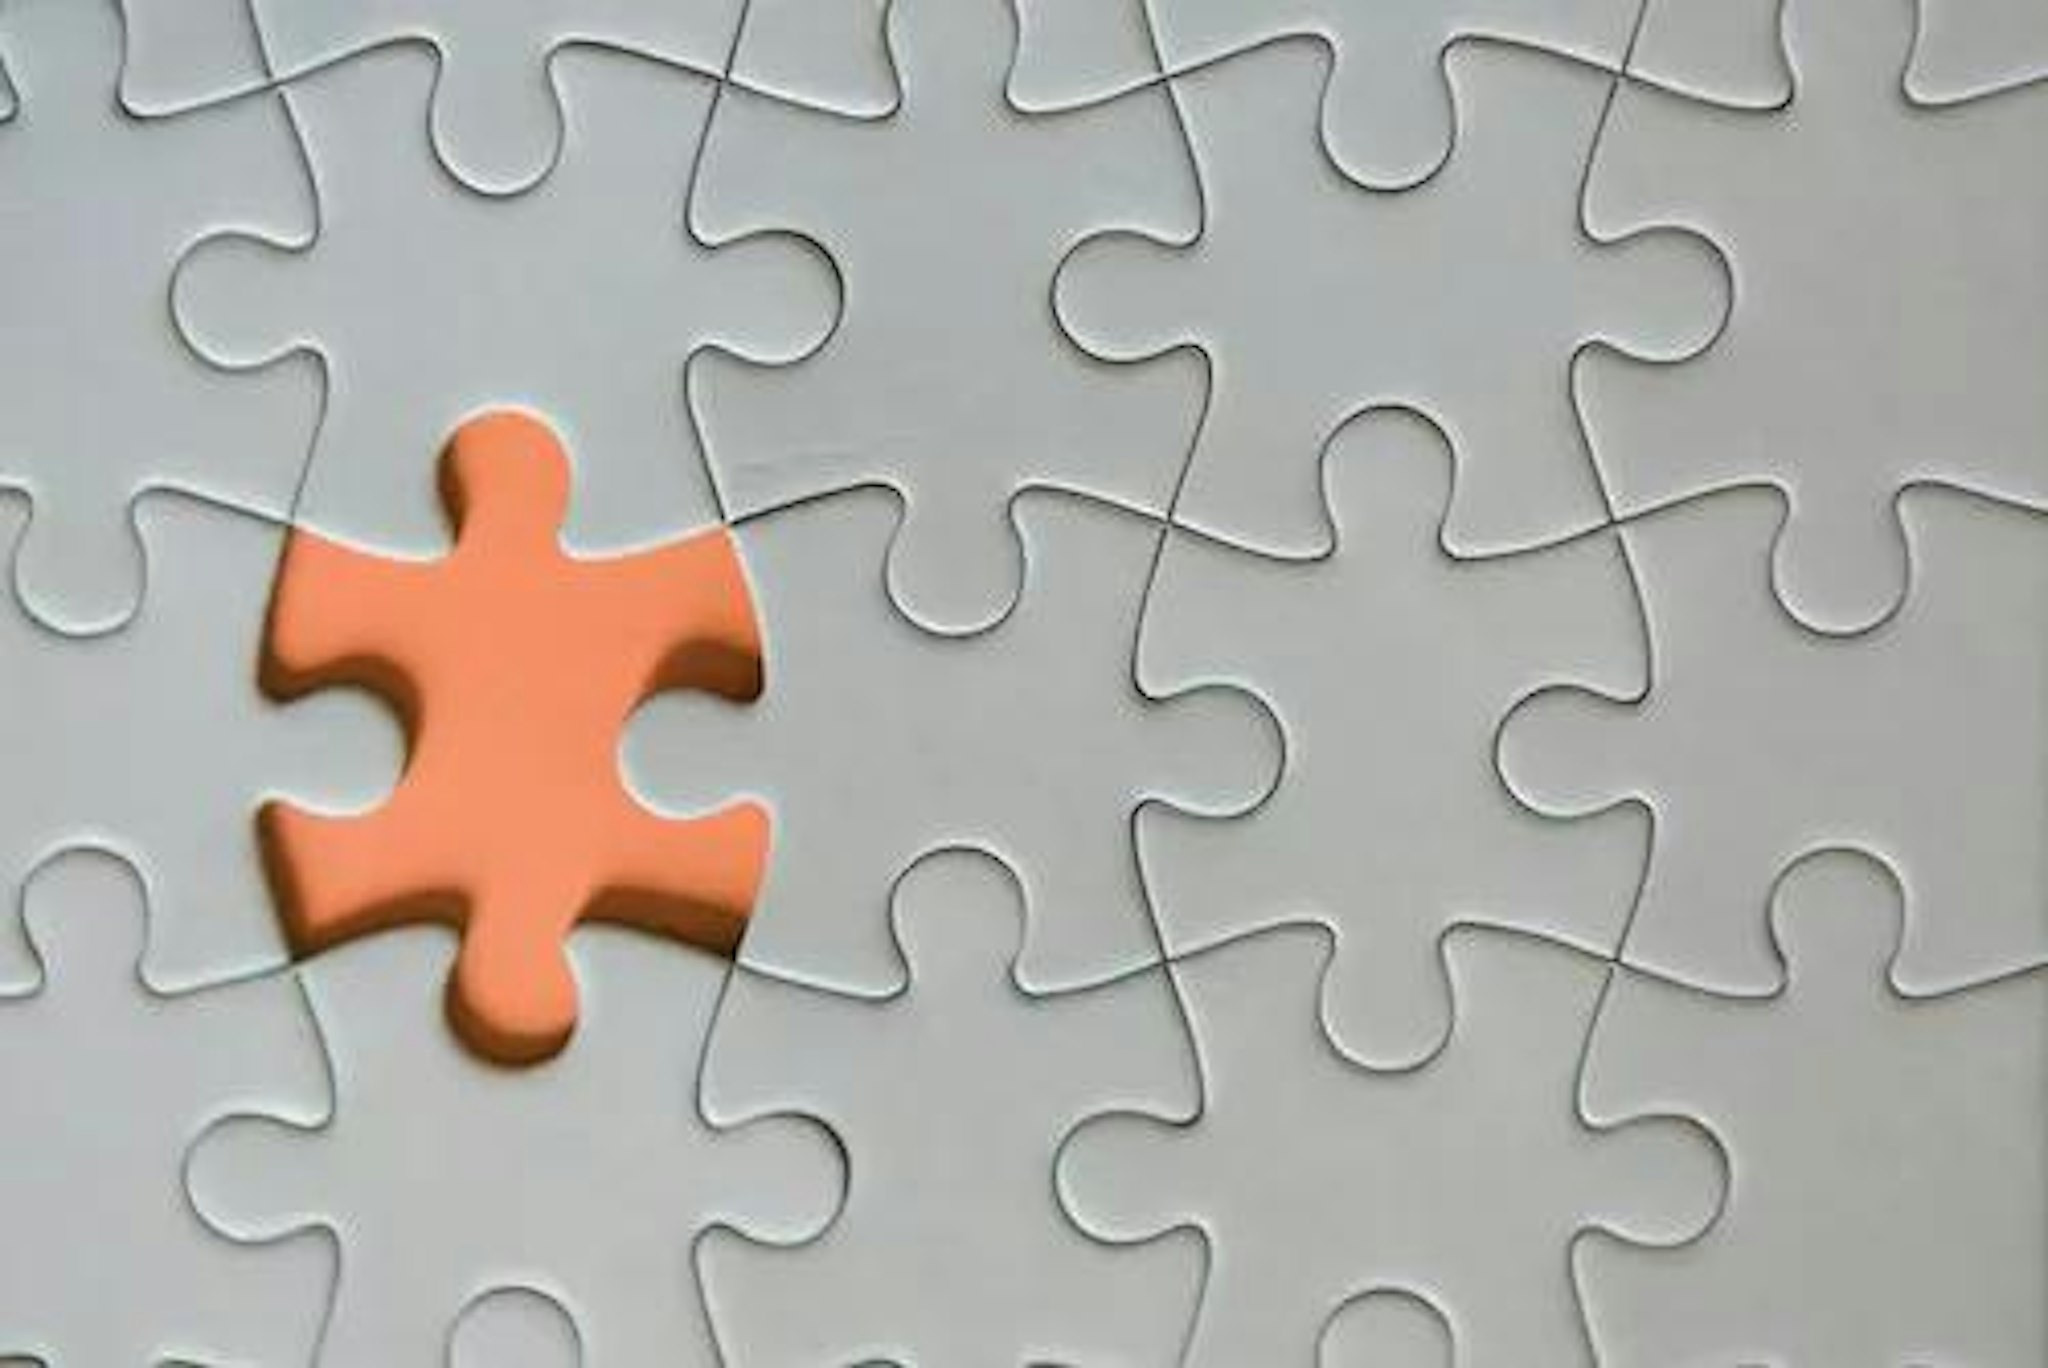 Picture of a grey puzzle with one orange piece